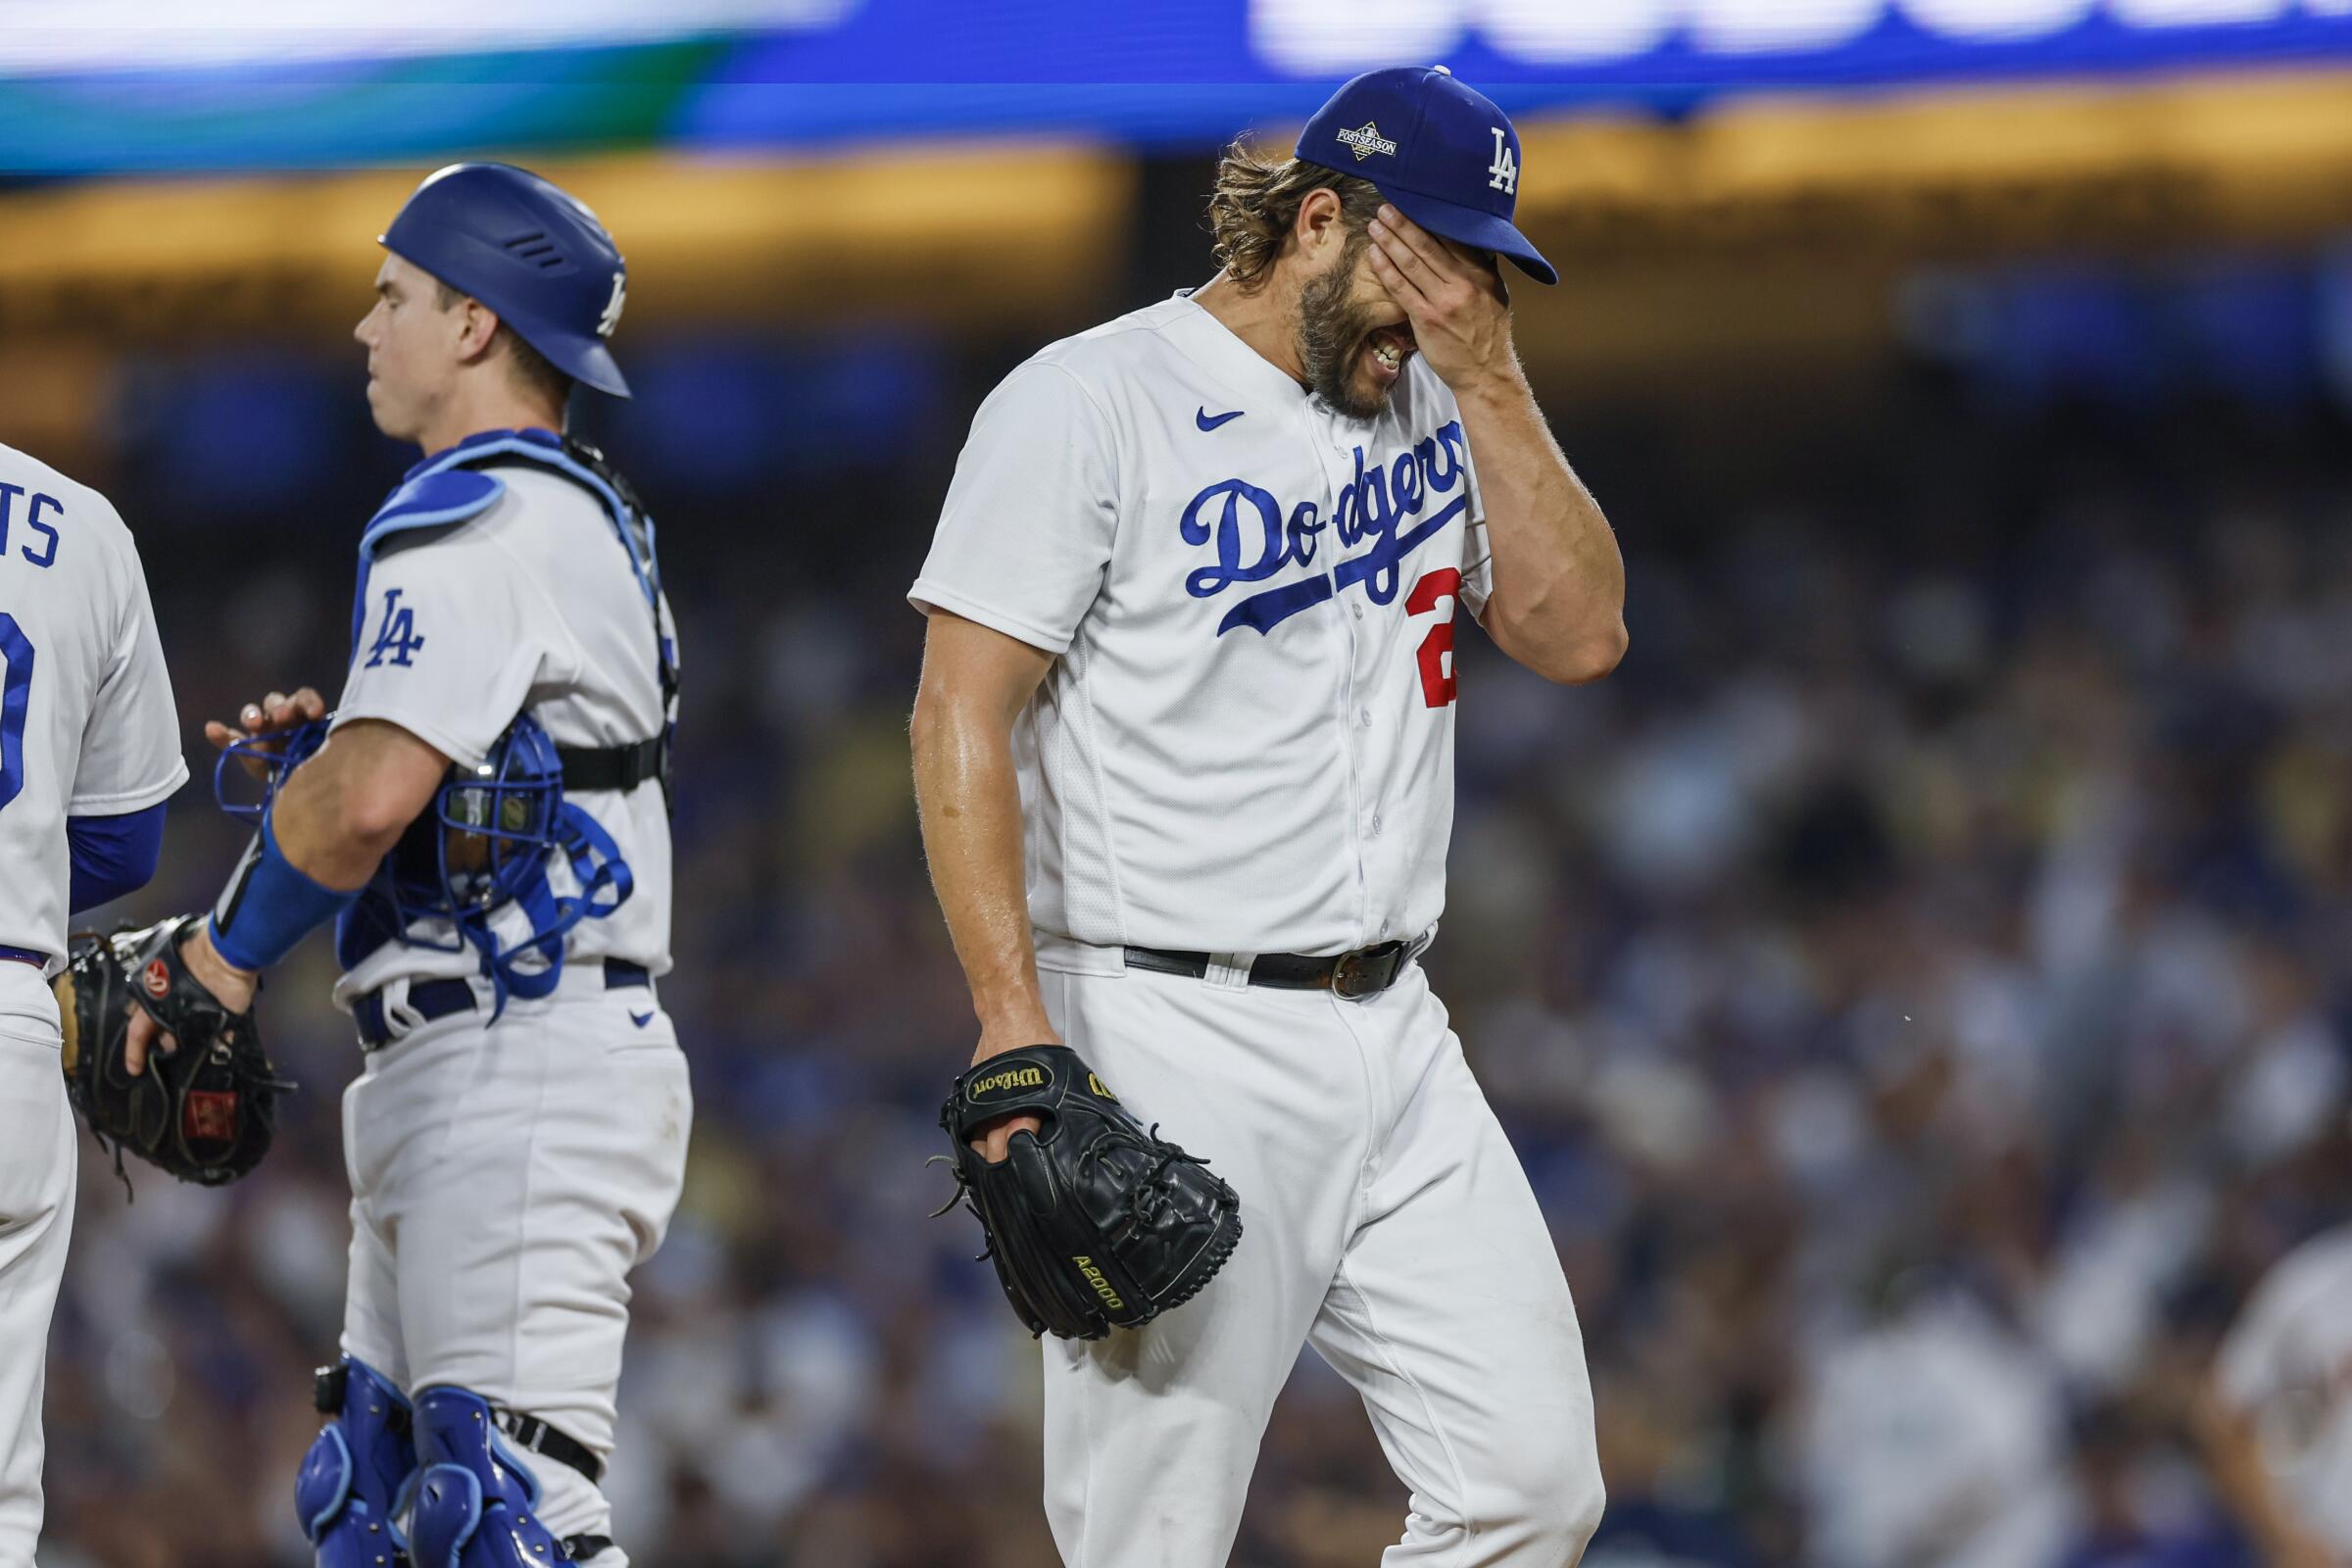 Los Angeles Dodgers Re-sign Player FIVE YEARS After He Last Played